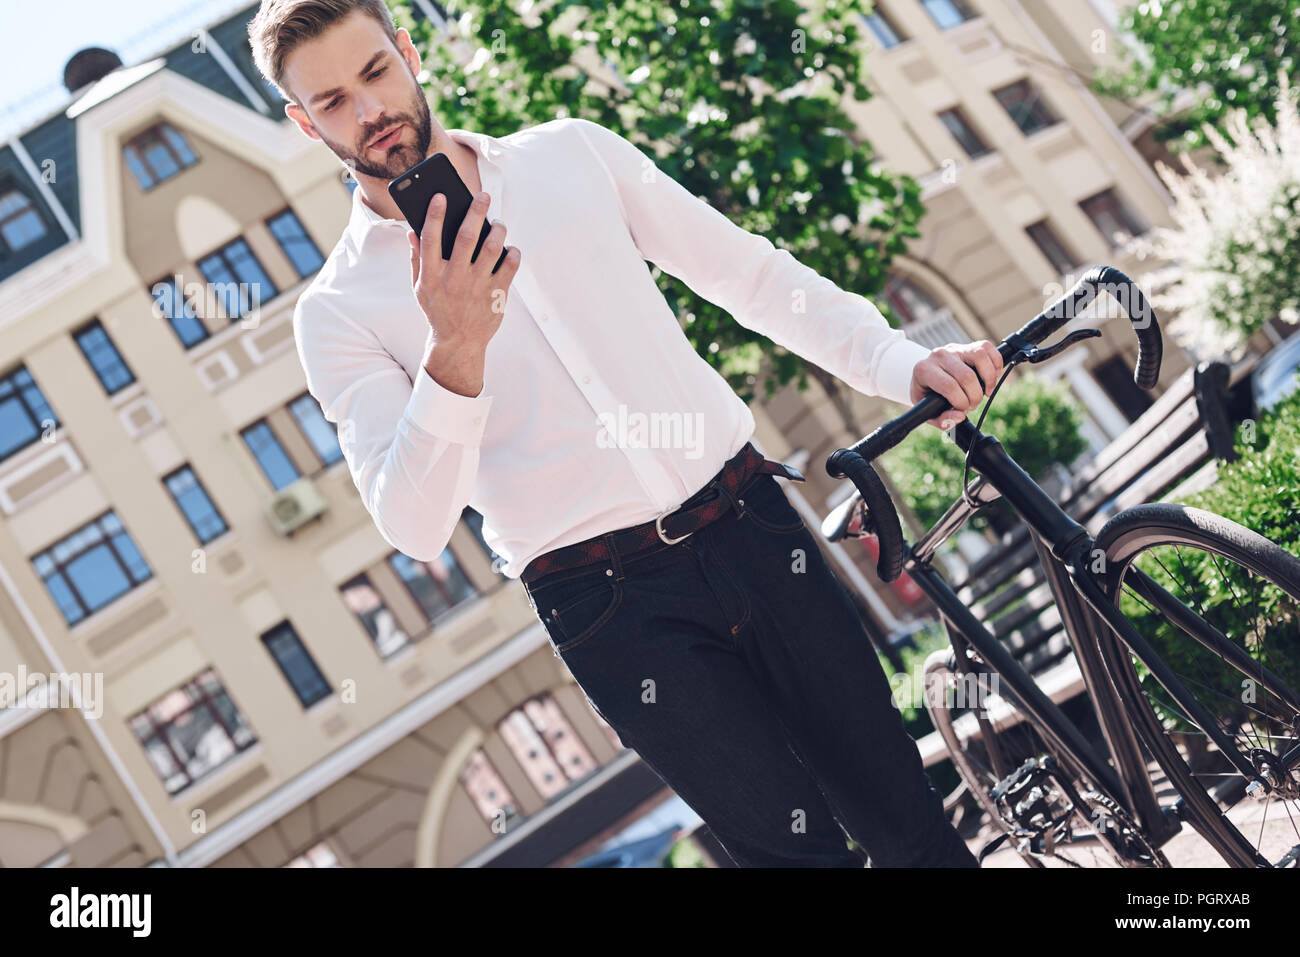 People, communication, technology, leisure and lifestyle - hipster man with smartphone on fixed gear bike chatting phone Stock Photo